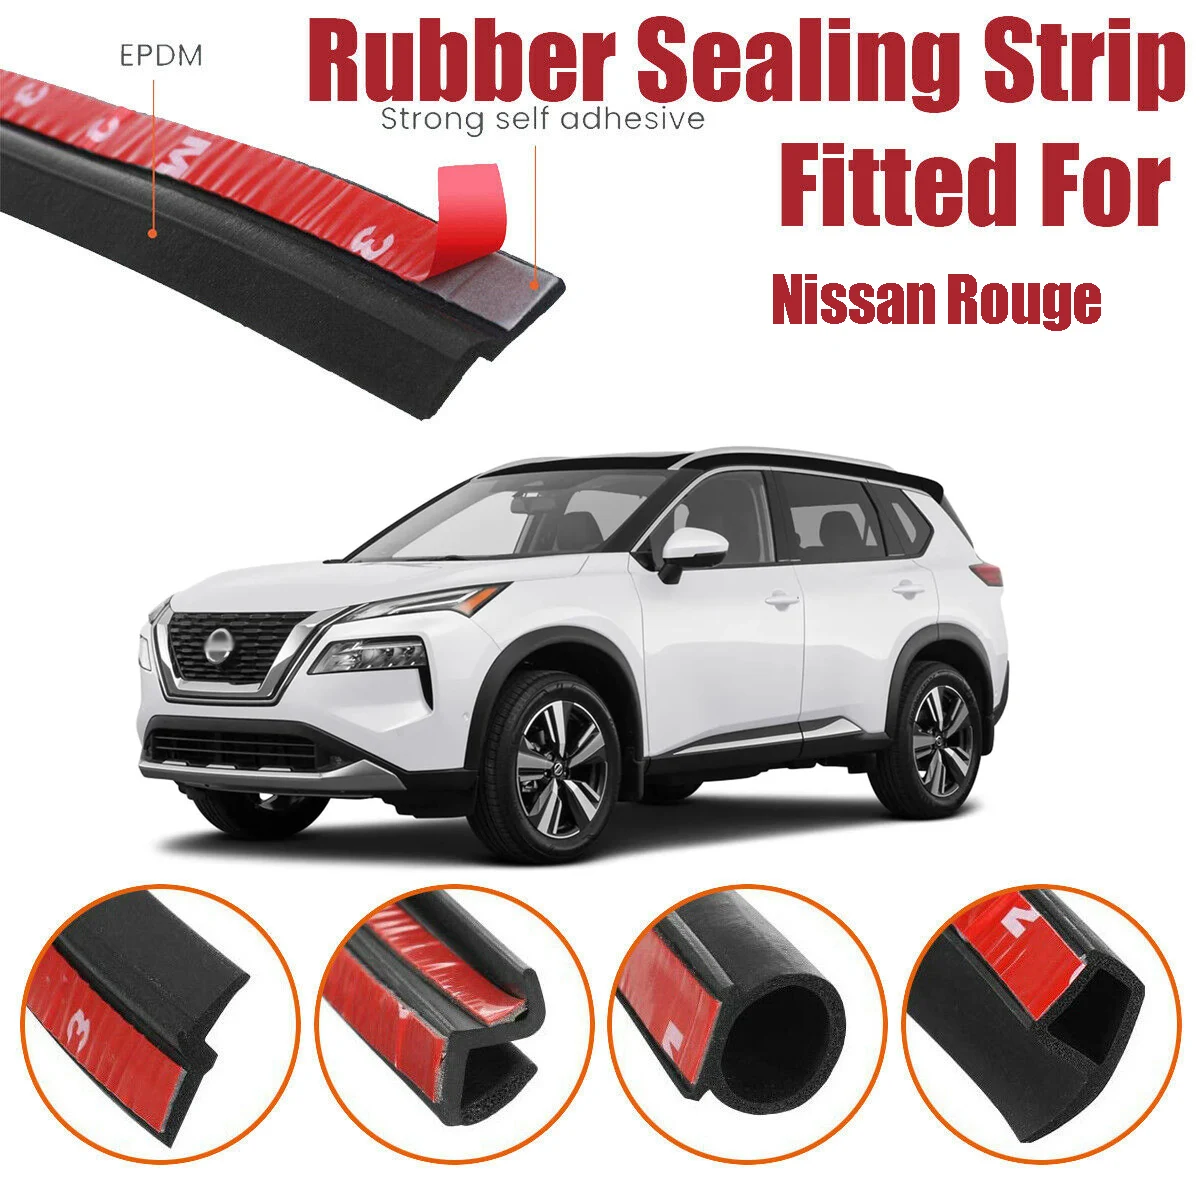 Door Seal Strip Kit Self Adhesive Window Engine Cover Soundproof Rubber Weather Draft Noise Reduction For Nissan Rouge